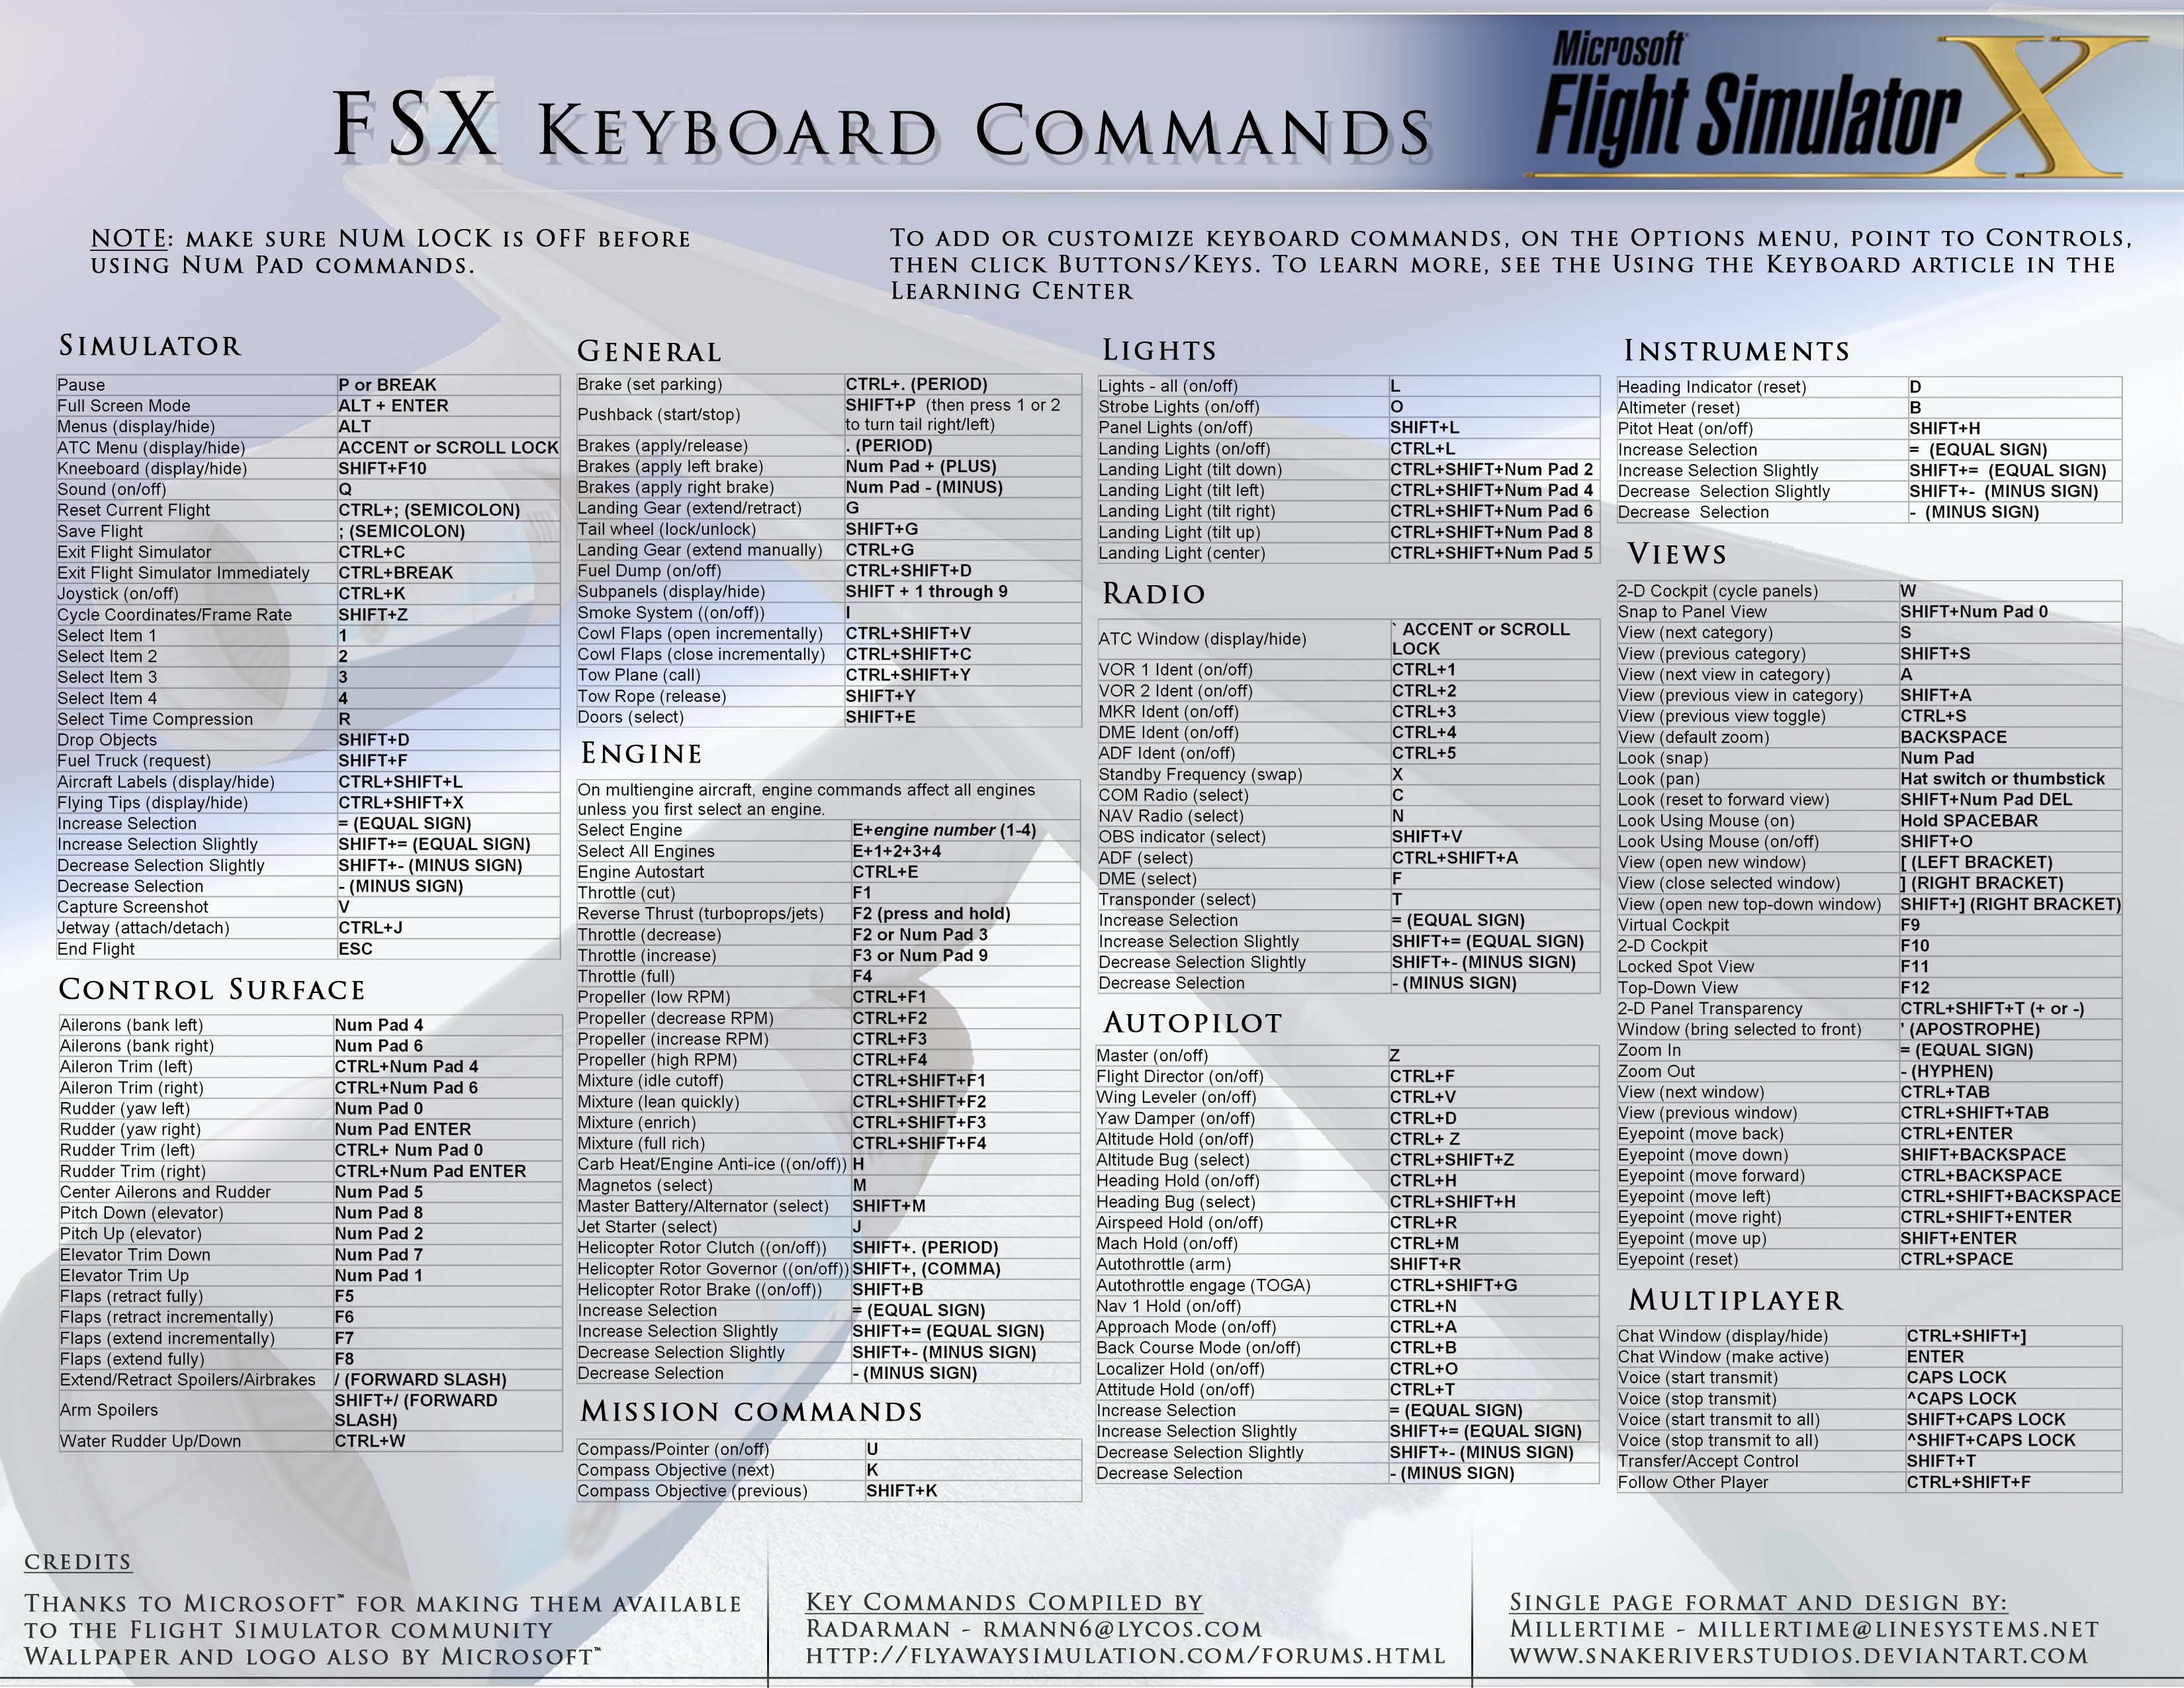 key-commands-pamphlet-for-fsx